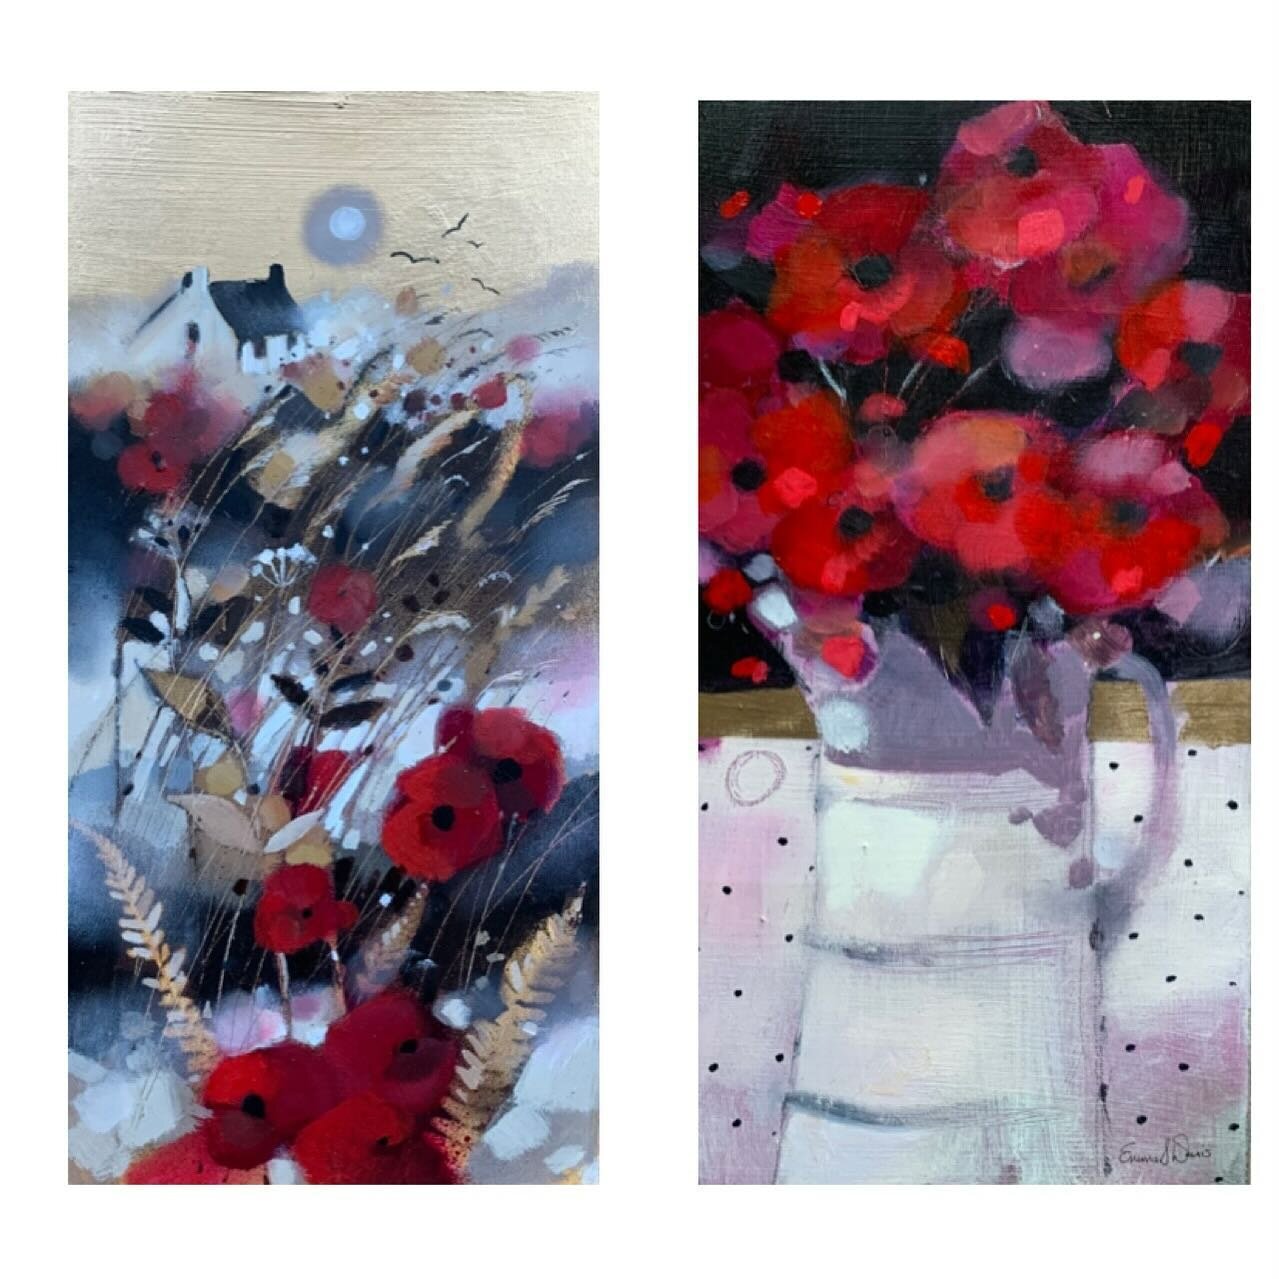 Little pair of poppies and gold. 
www.emmasdavisartist.co.uk
.
.
.
#emmasdavisartist #emmadavisart #scottishart #artworkoftheday #painting #poppies #poppyart #stilllife #oilpainting #contemporaryart